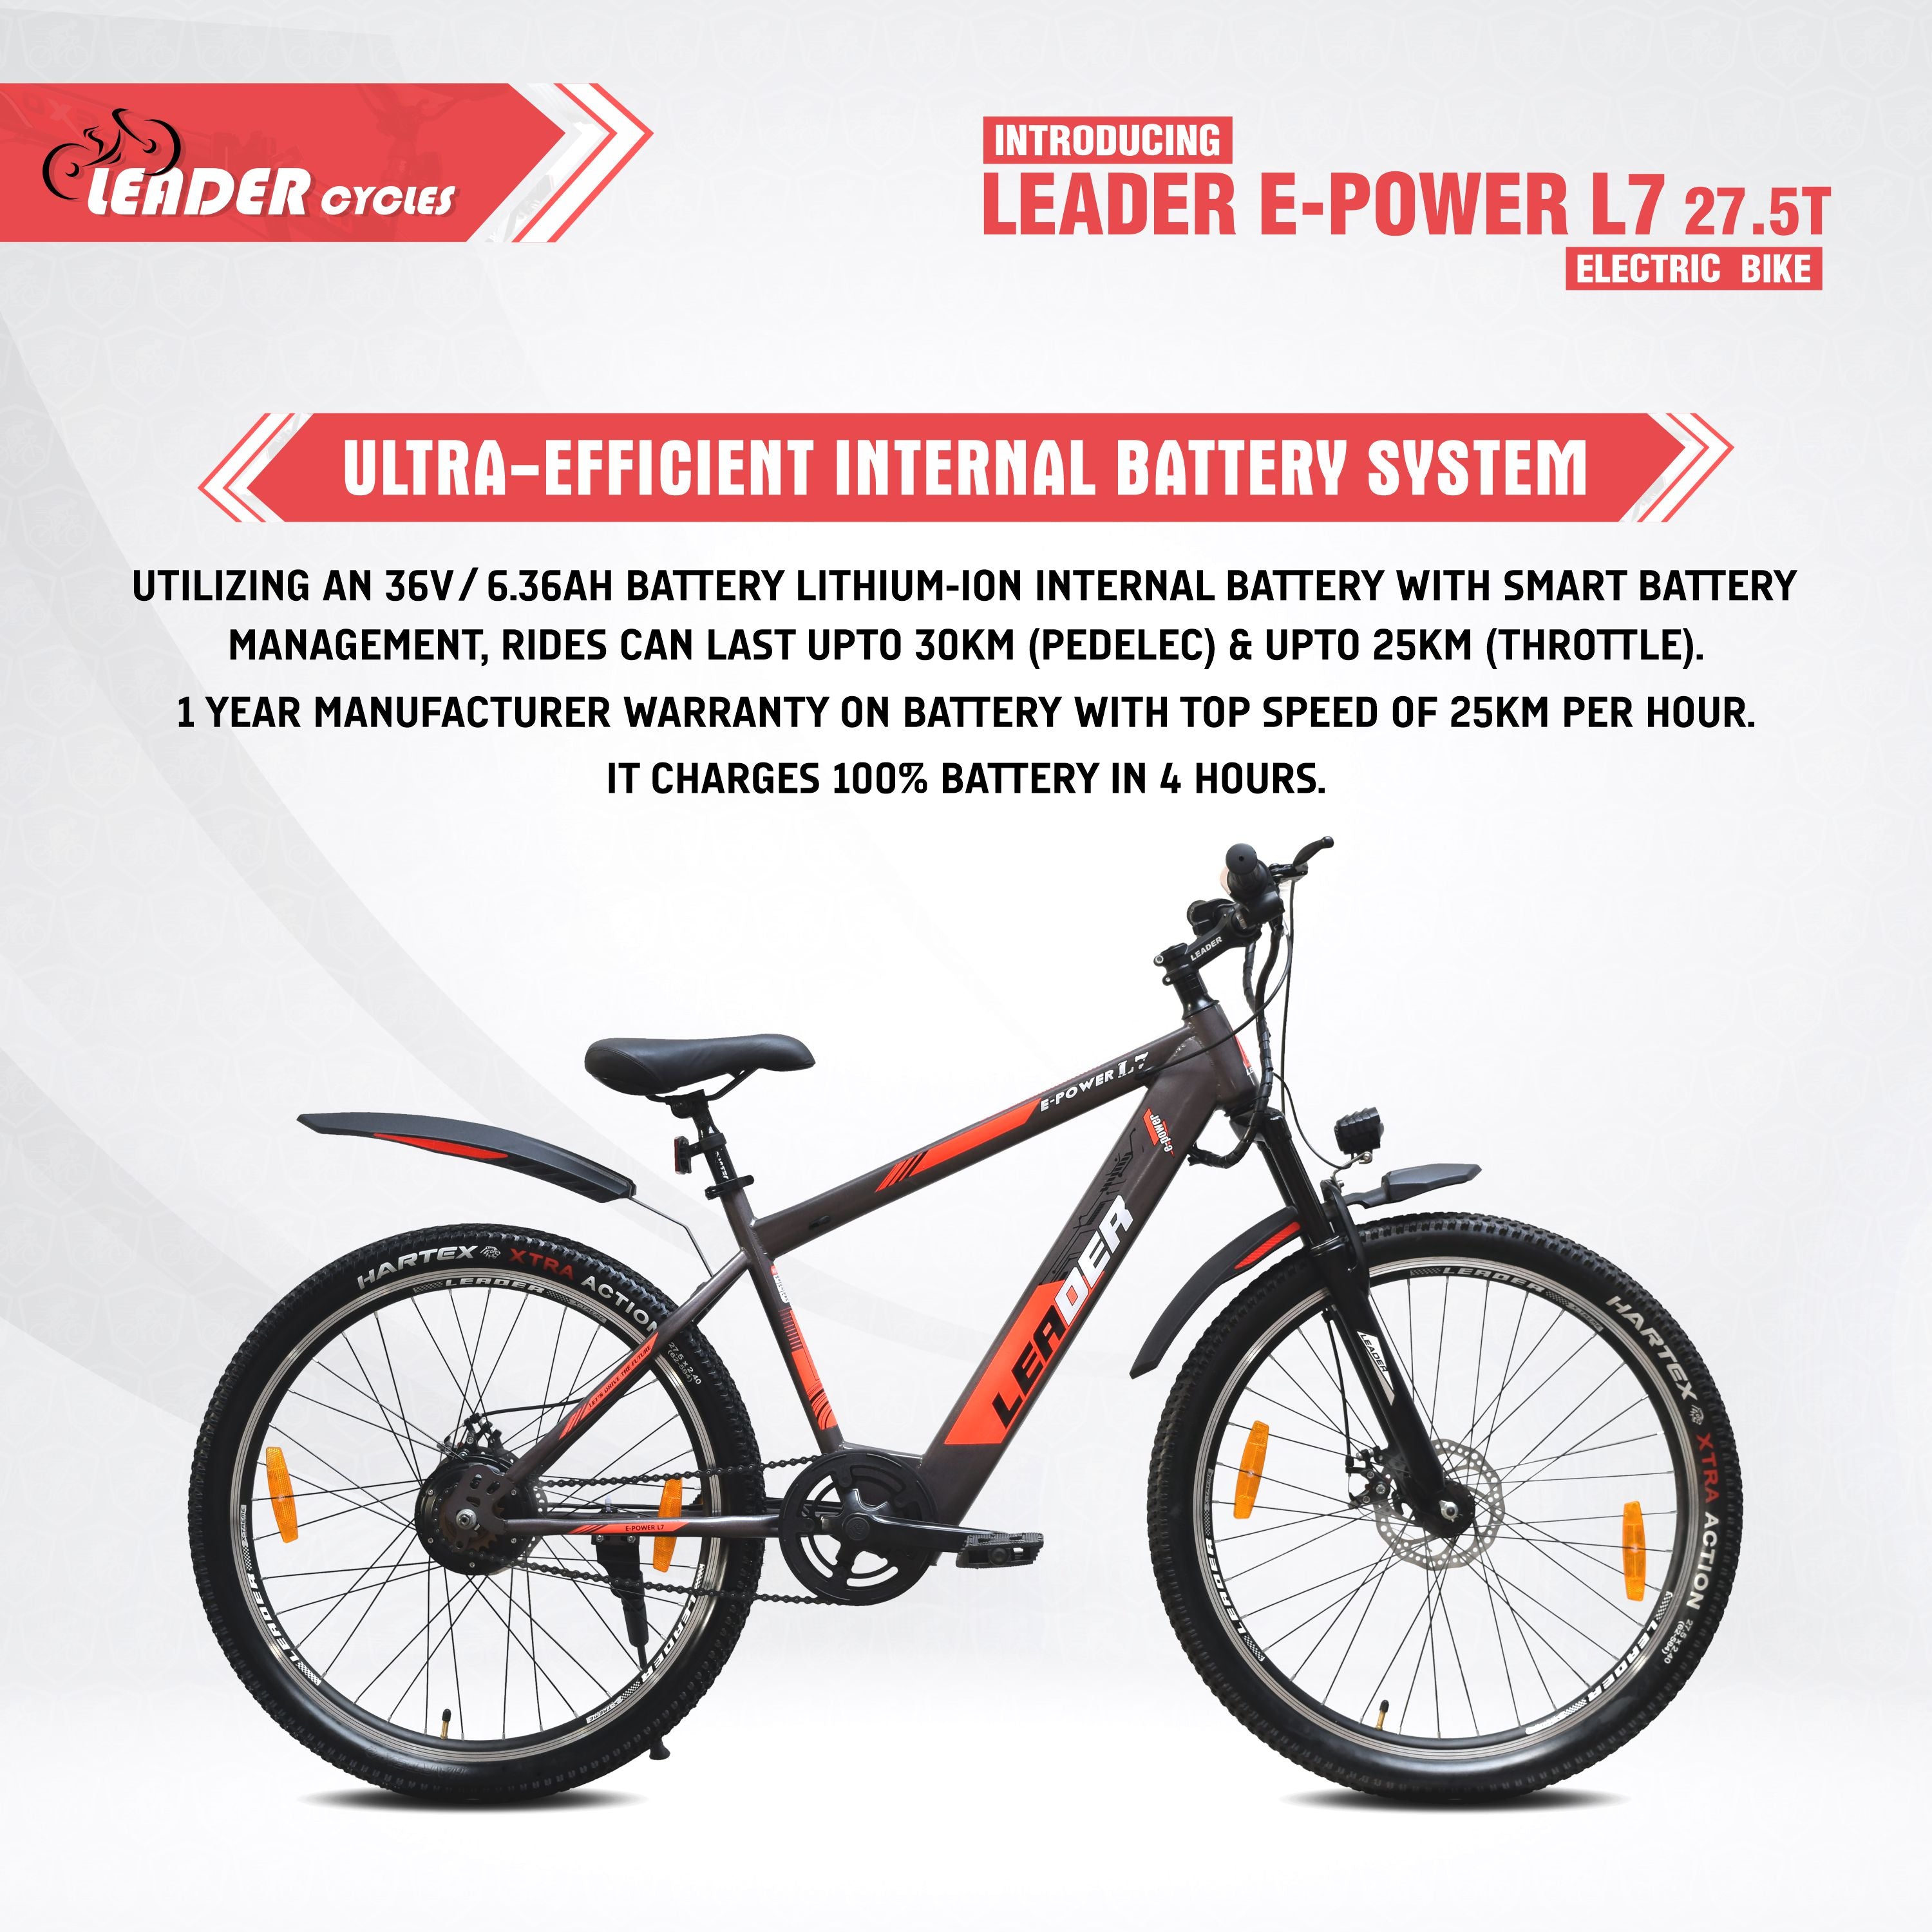 Leader E-Power L7 27.5T Electric Cycle